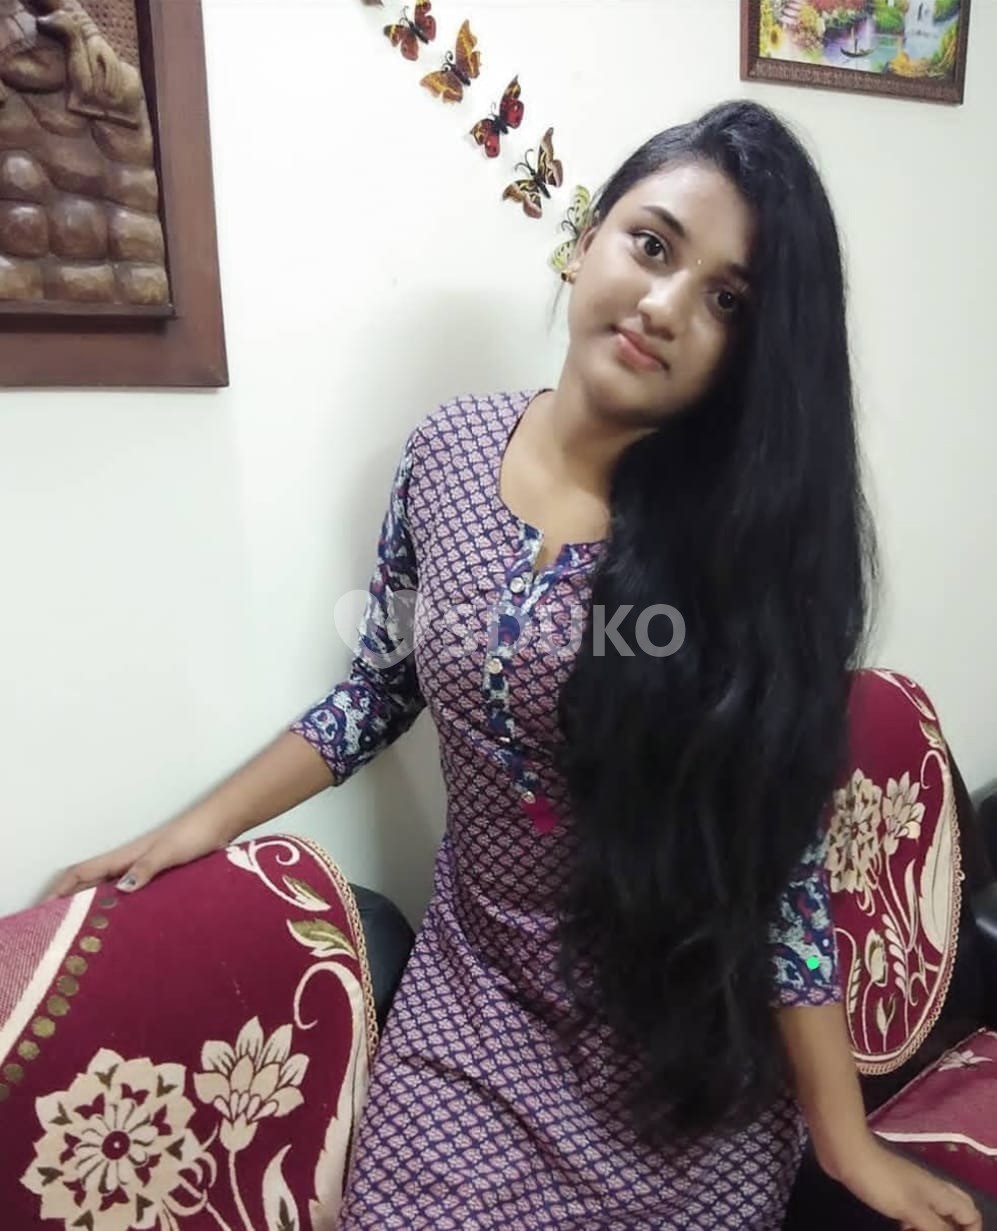 Kukatpally......🌟...low price 🥰100% SAFE AND SECURE TODAY LOW PRICE UNLIMITED ENJOY HOT COLLEGE GIRL HOUSEWIFE AUN